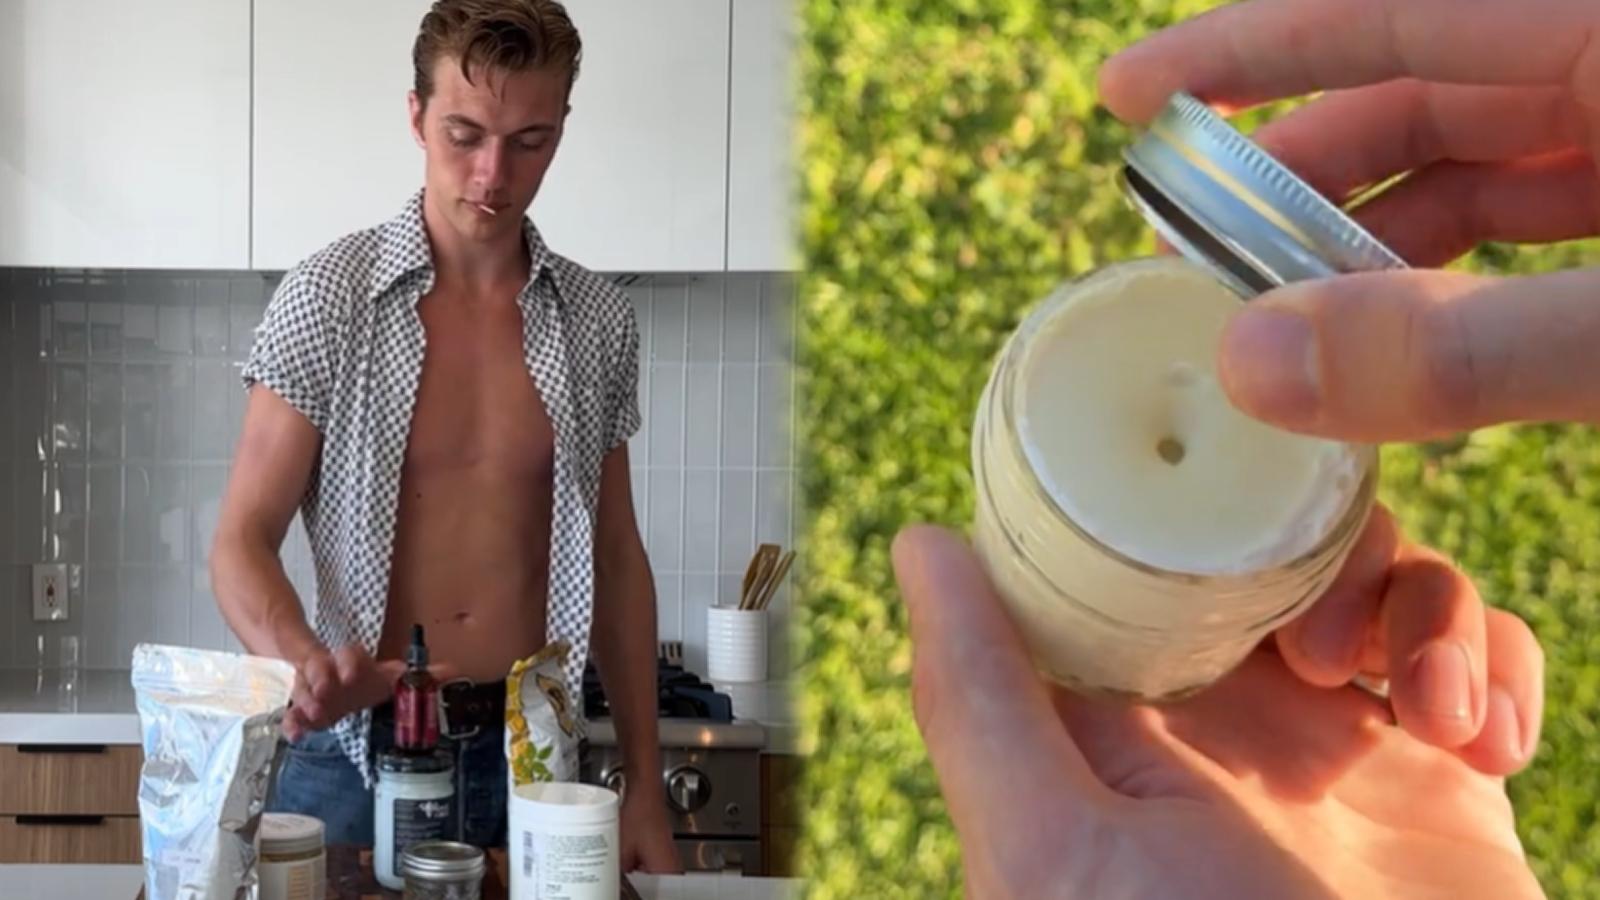 TikTok influencer's boyfriend making sunscreen, with her showing the final result